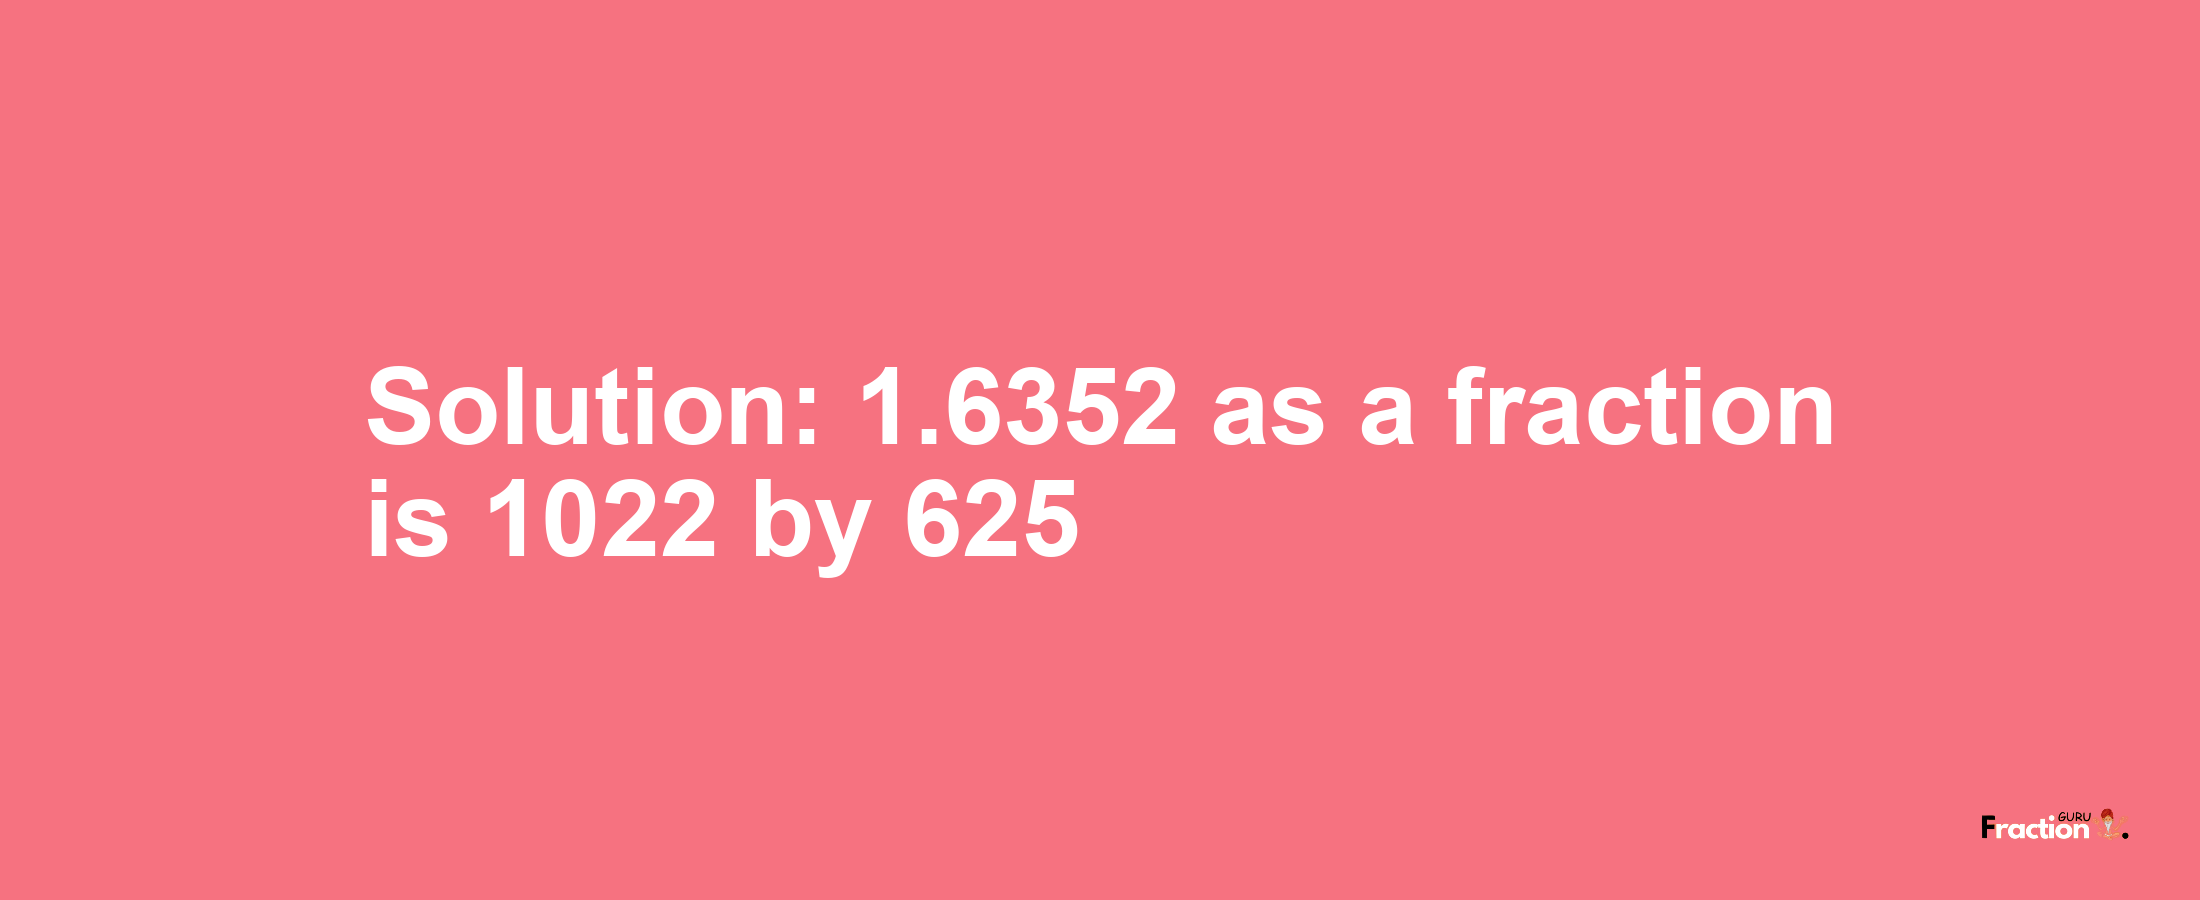 Solution:1.6352 as a fraction is 1022/625